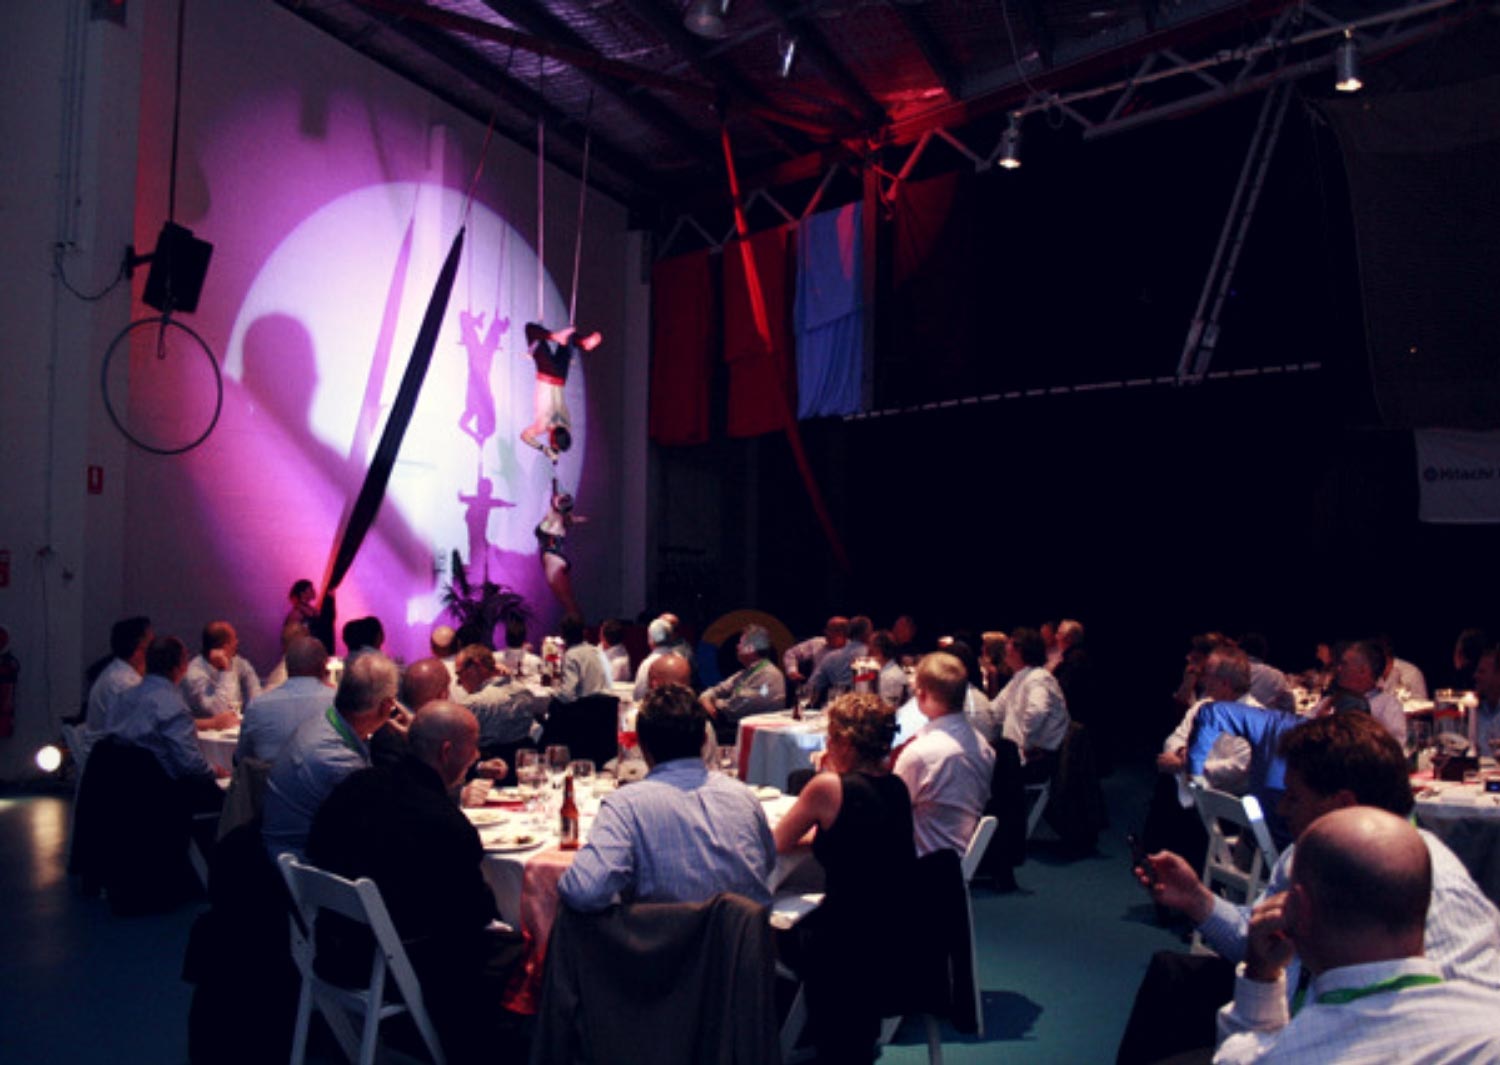 Circus Arts was hired for a 450 people function